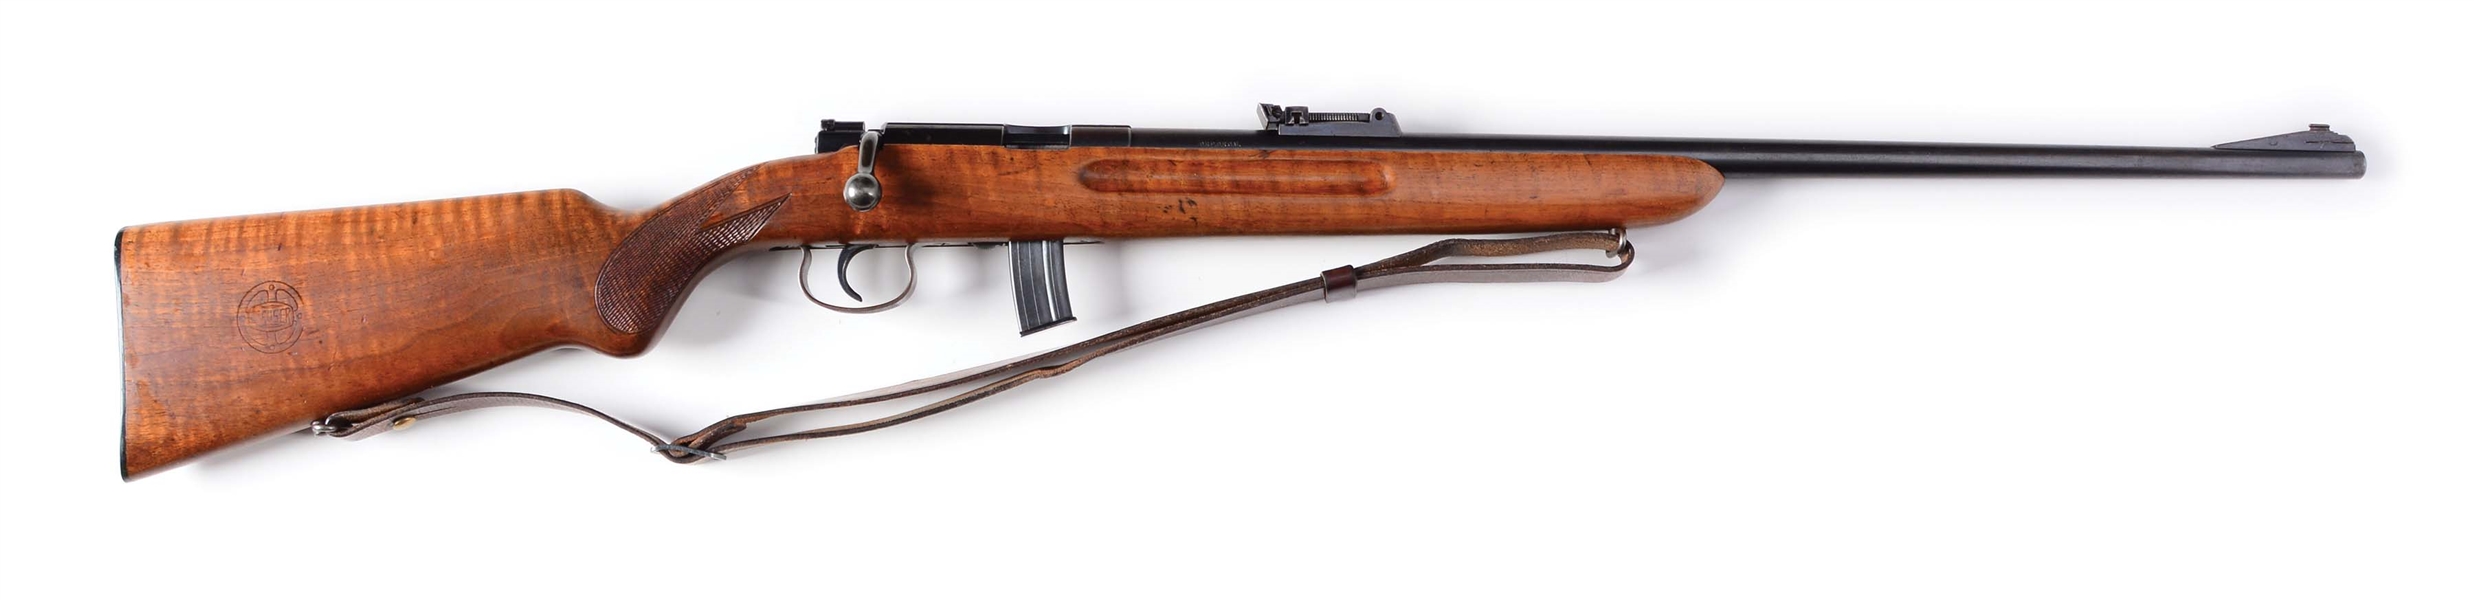 (C) MAUSER BUG PROOF .22 BOLT ACTION SPORTING RIFLE.